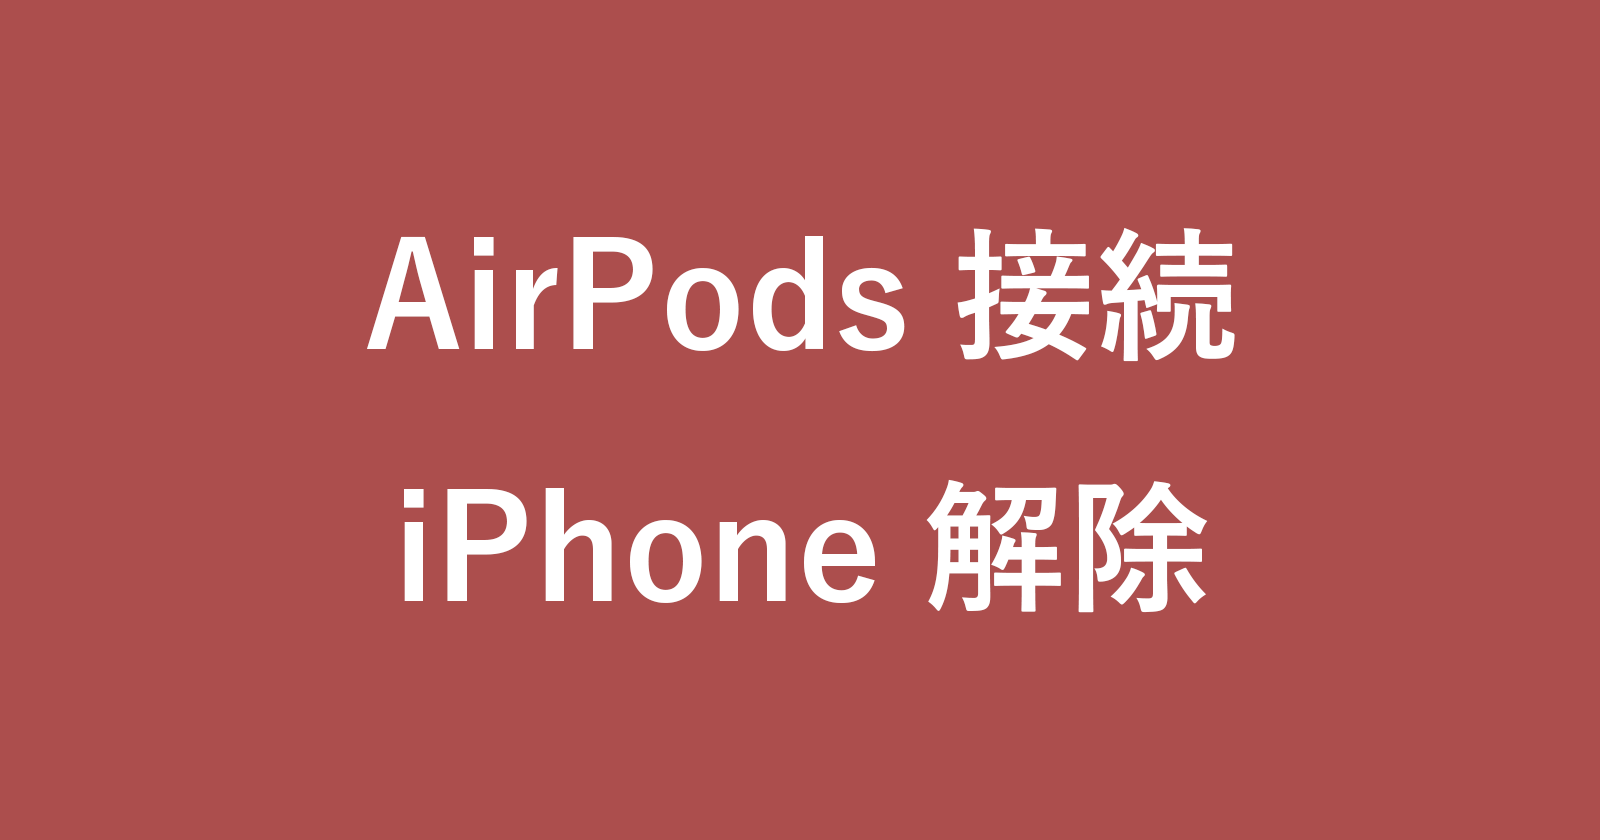 iphone bluetooth forget apple airpods